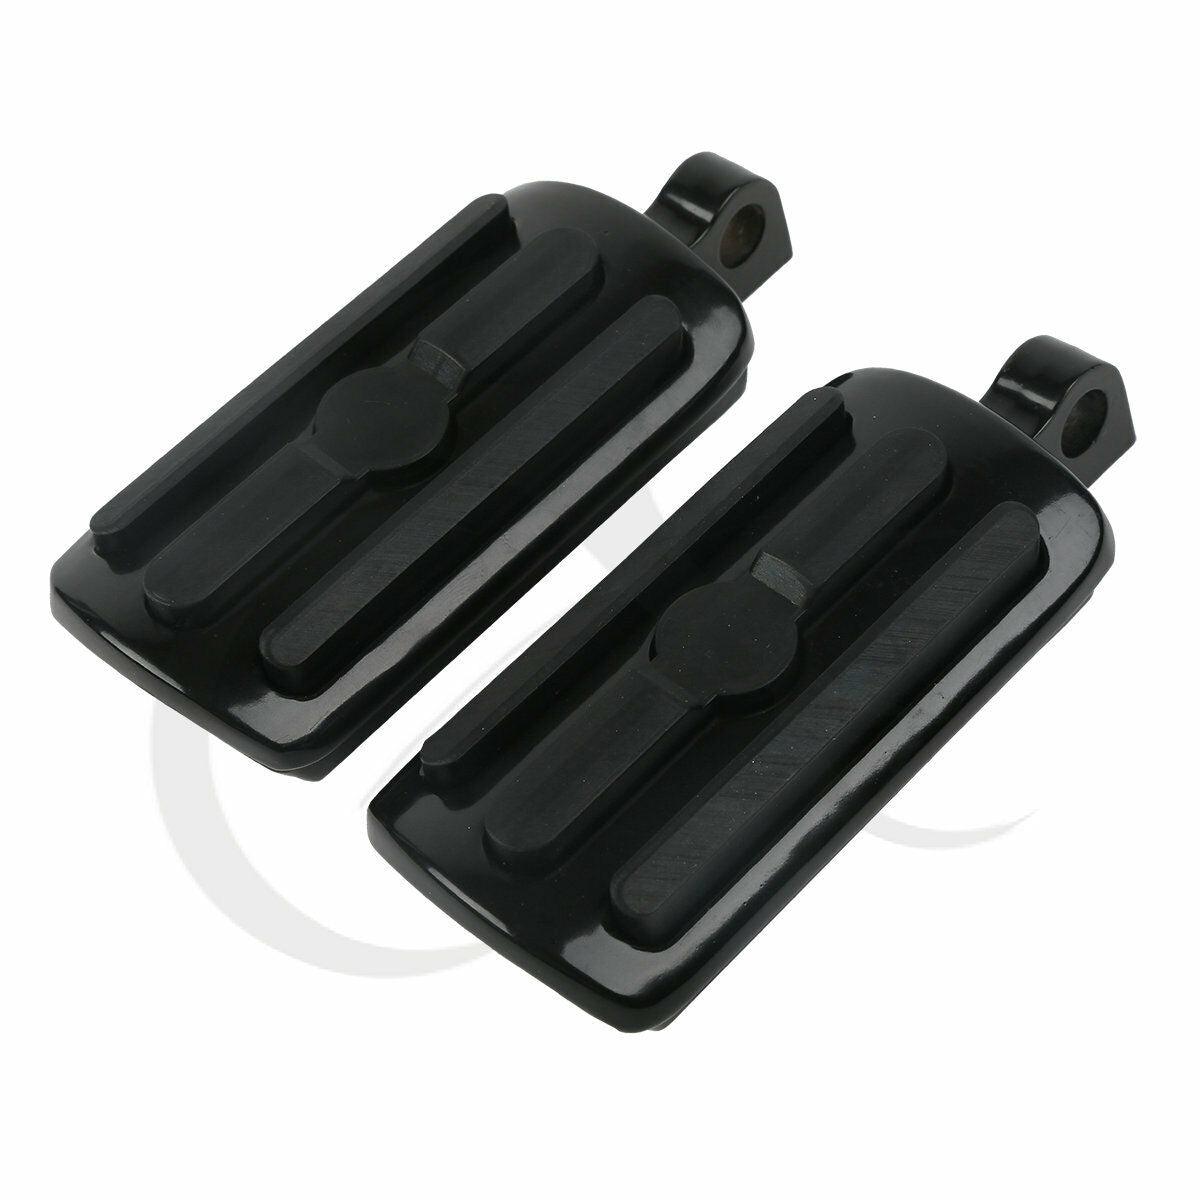 10mm Motorcycle Foot Pegs Rest Fit For Harley Street Glide Road King Male Mount - Moto Life Products